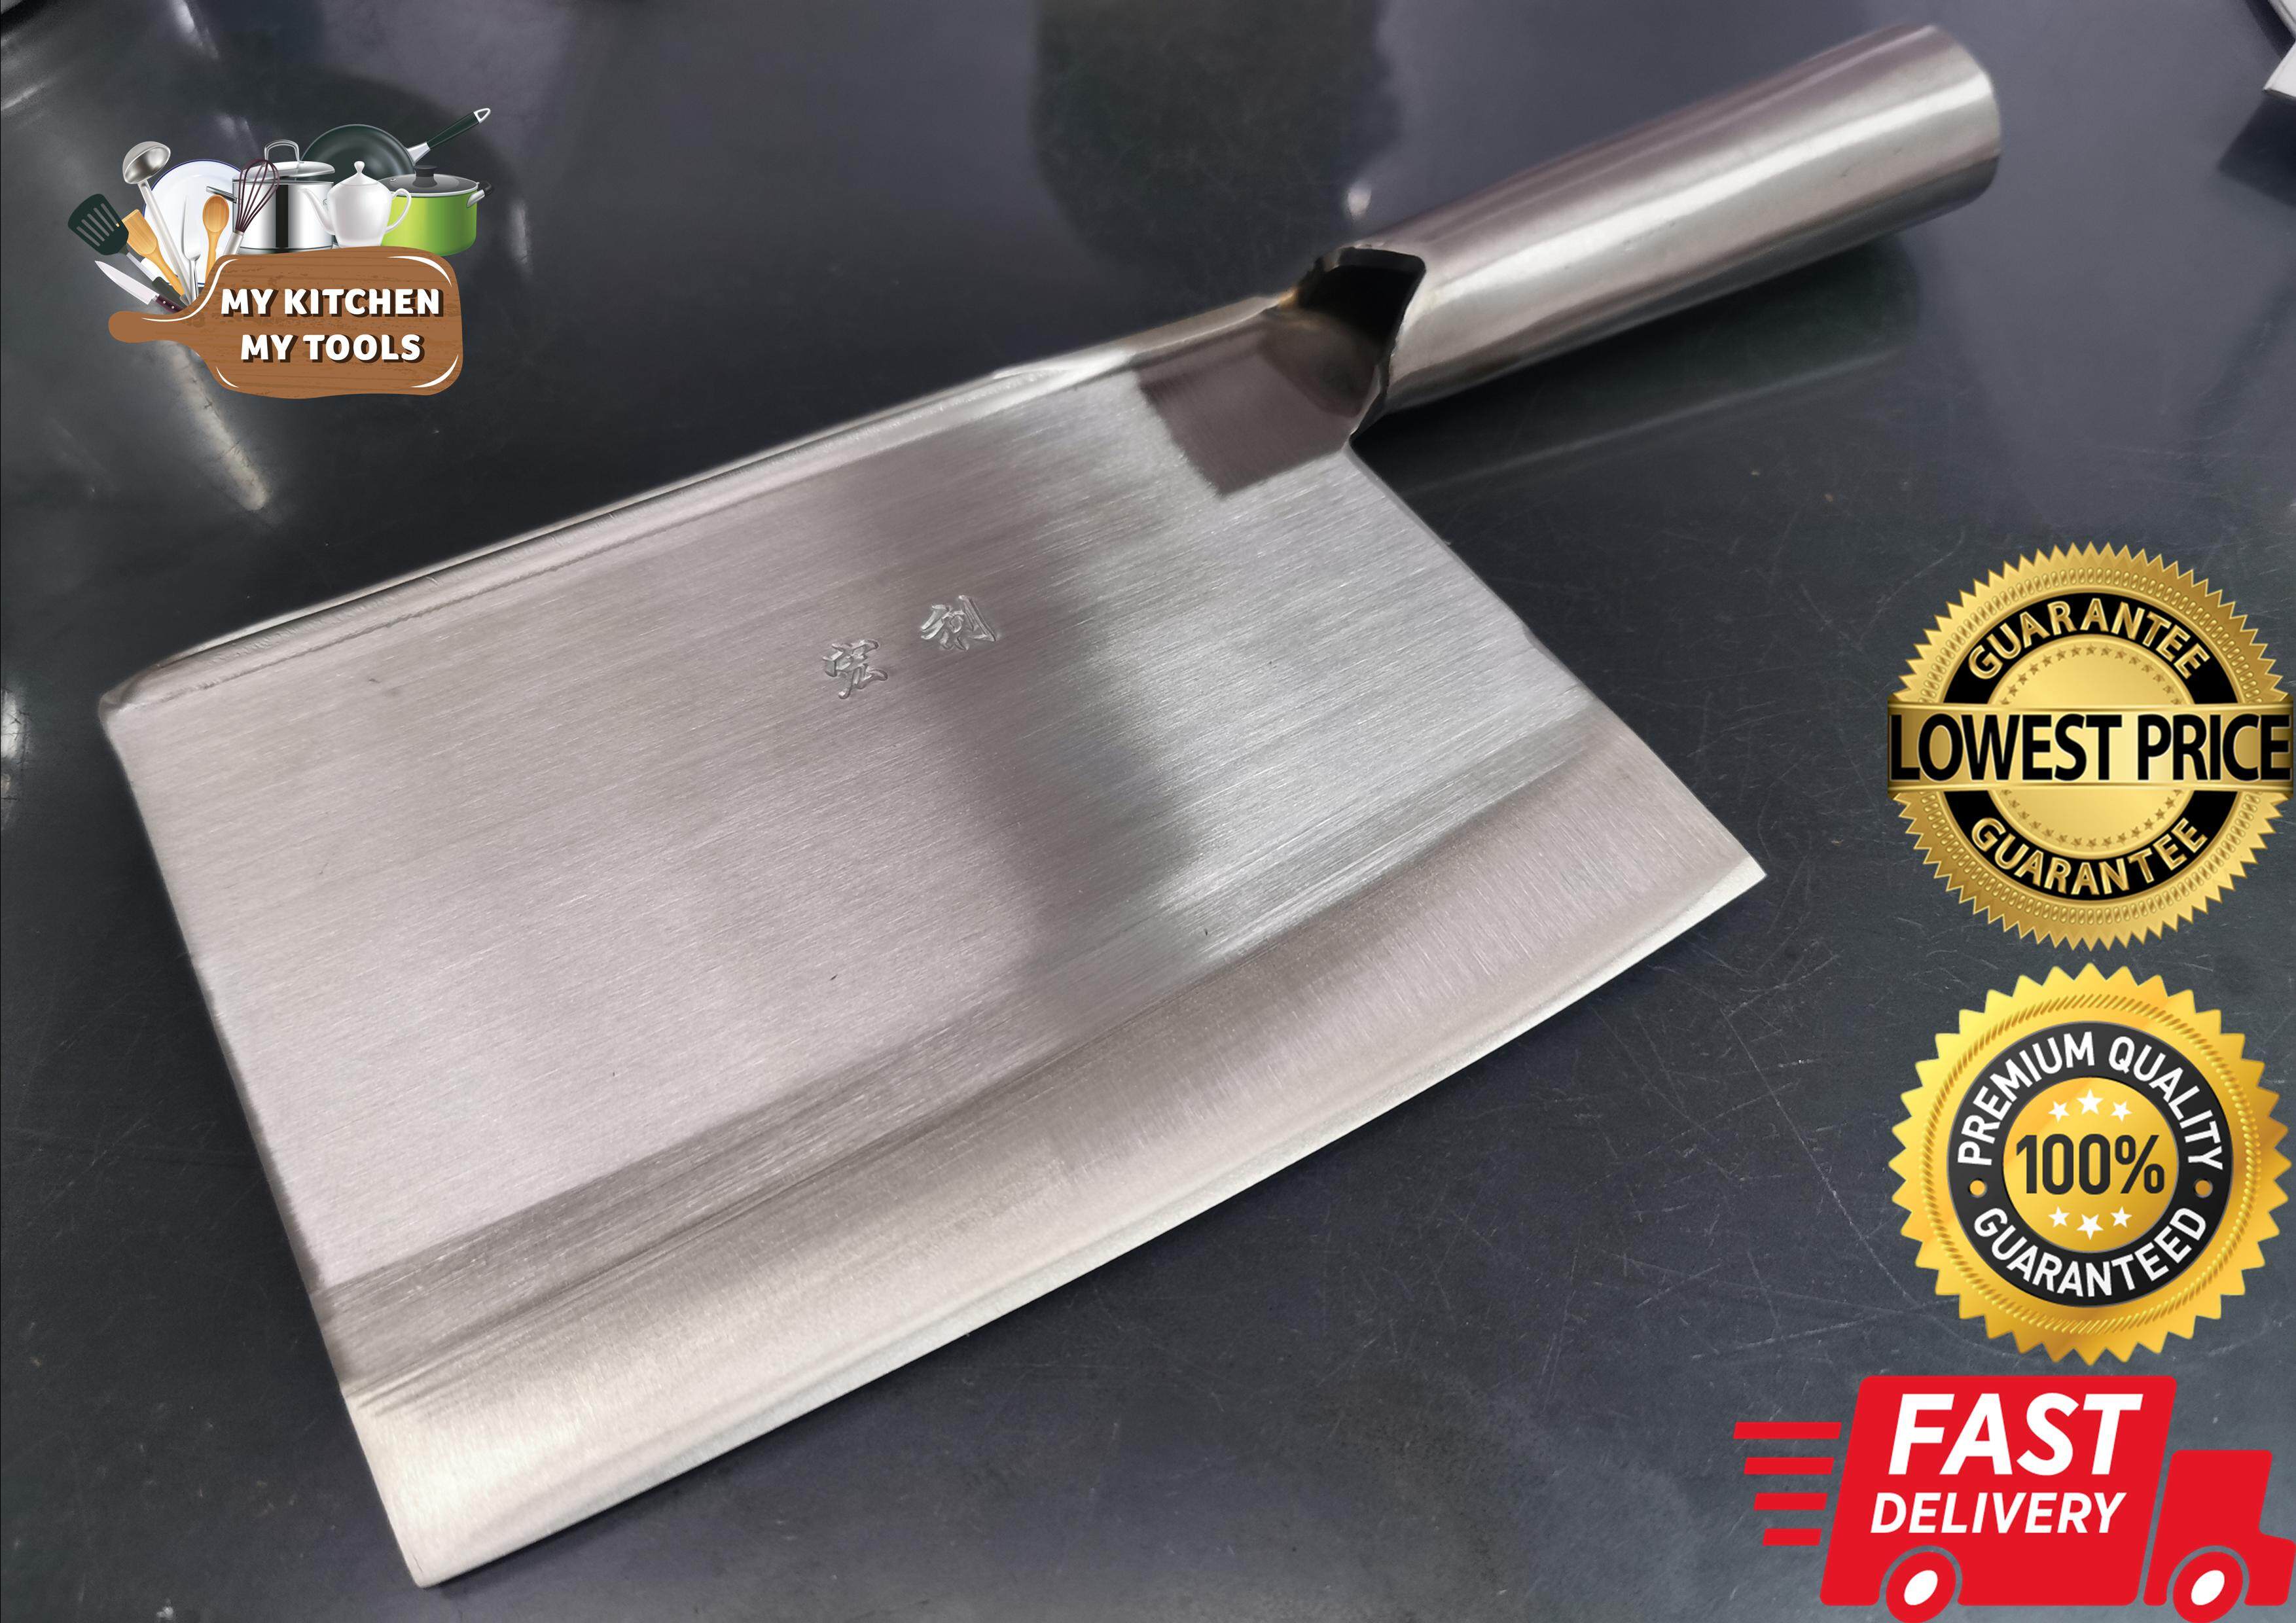 Shibazi Stainless Steel Slicing Cleaver Wood Handle D02 Toronto